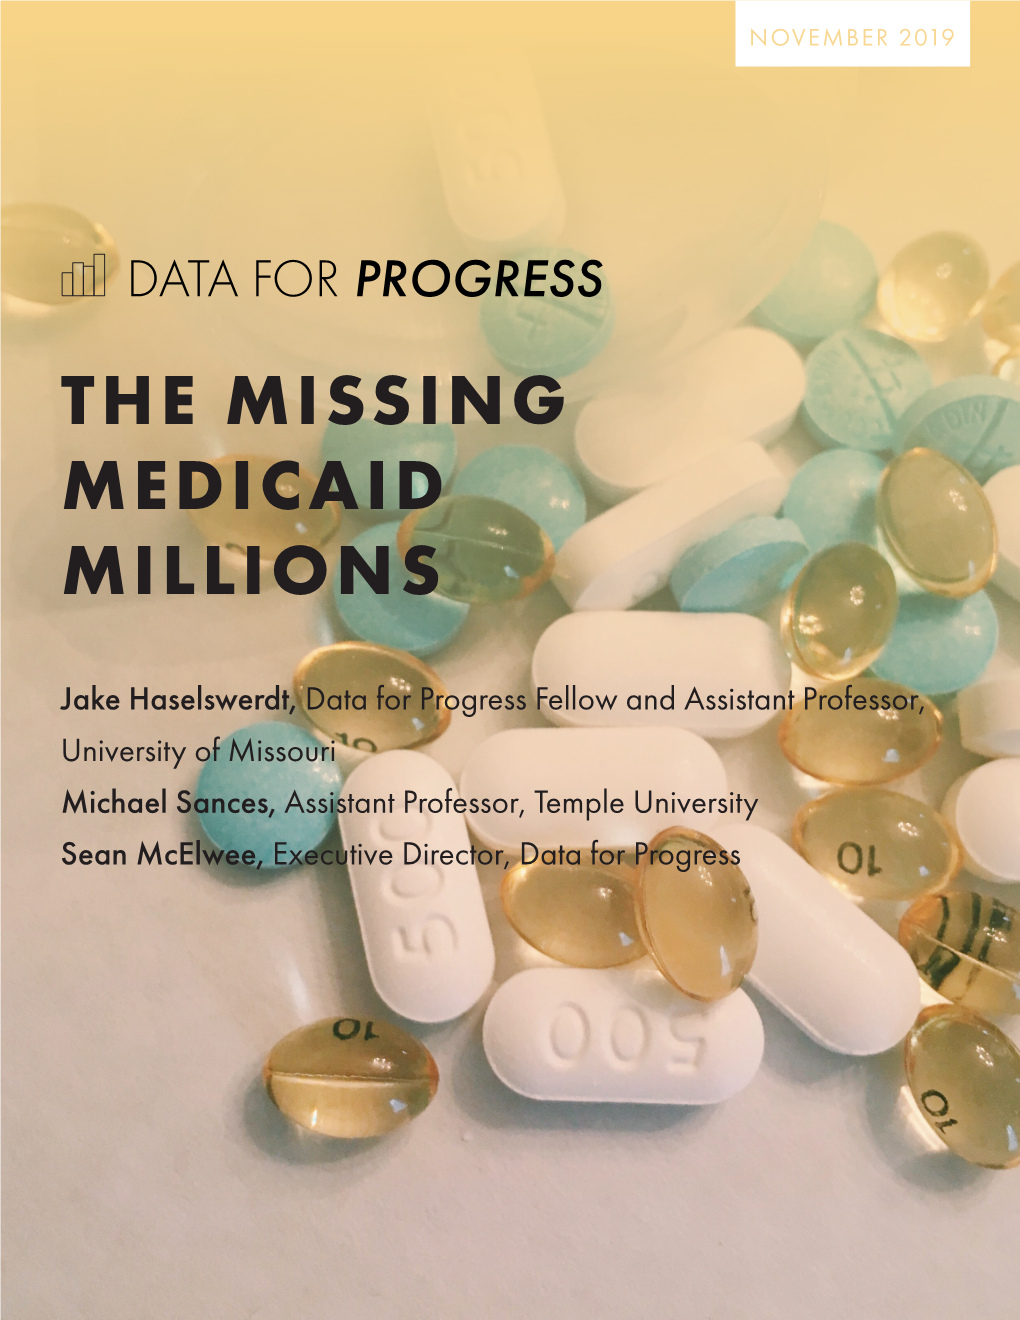 The Missing Medicaid Millions